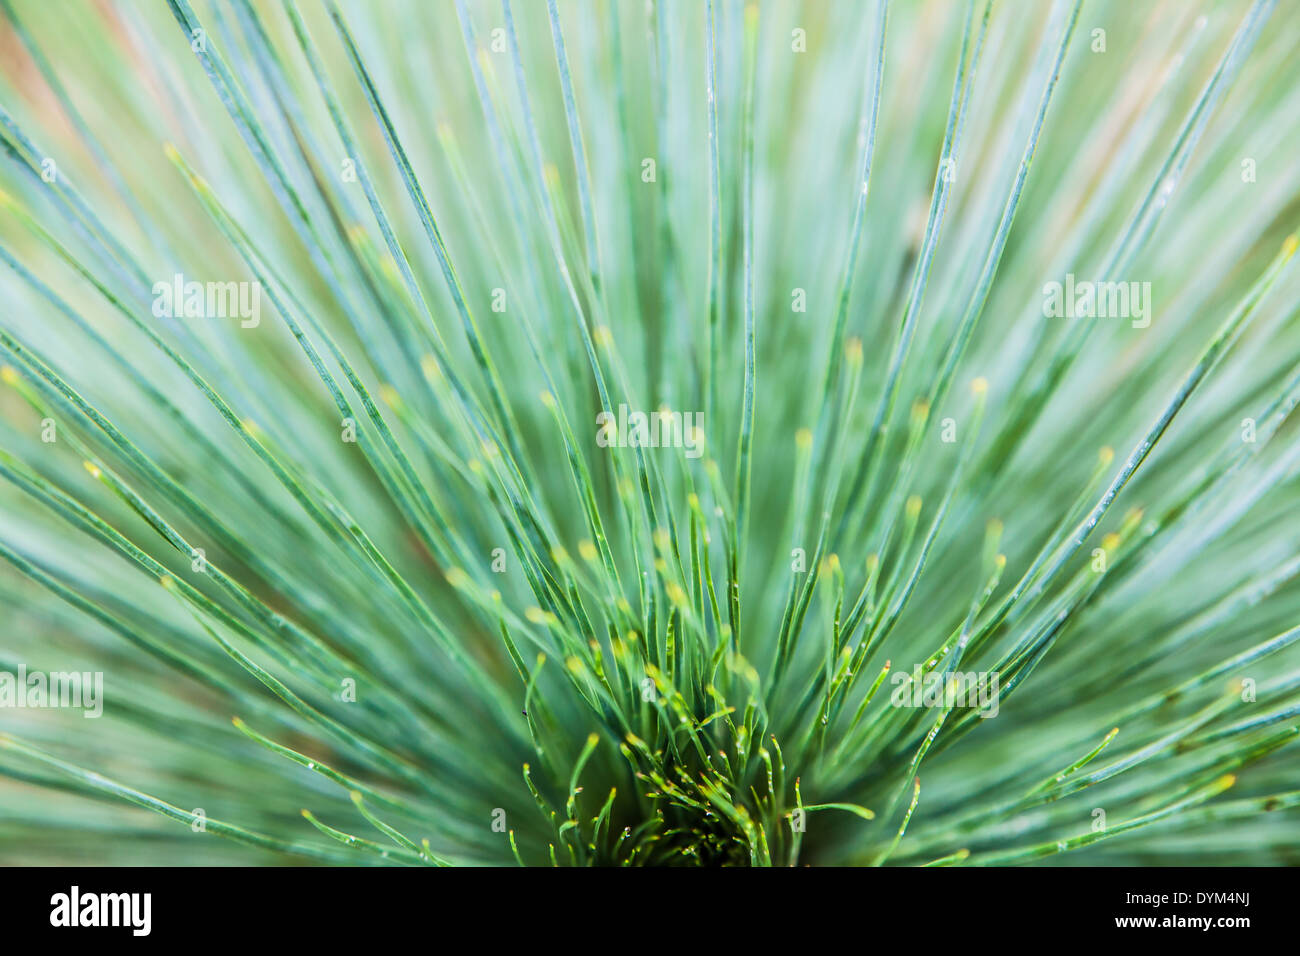 The fronds of a plant making an interesting fan shape Stock Photo